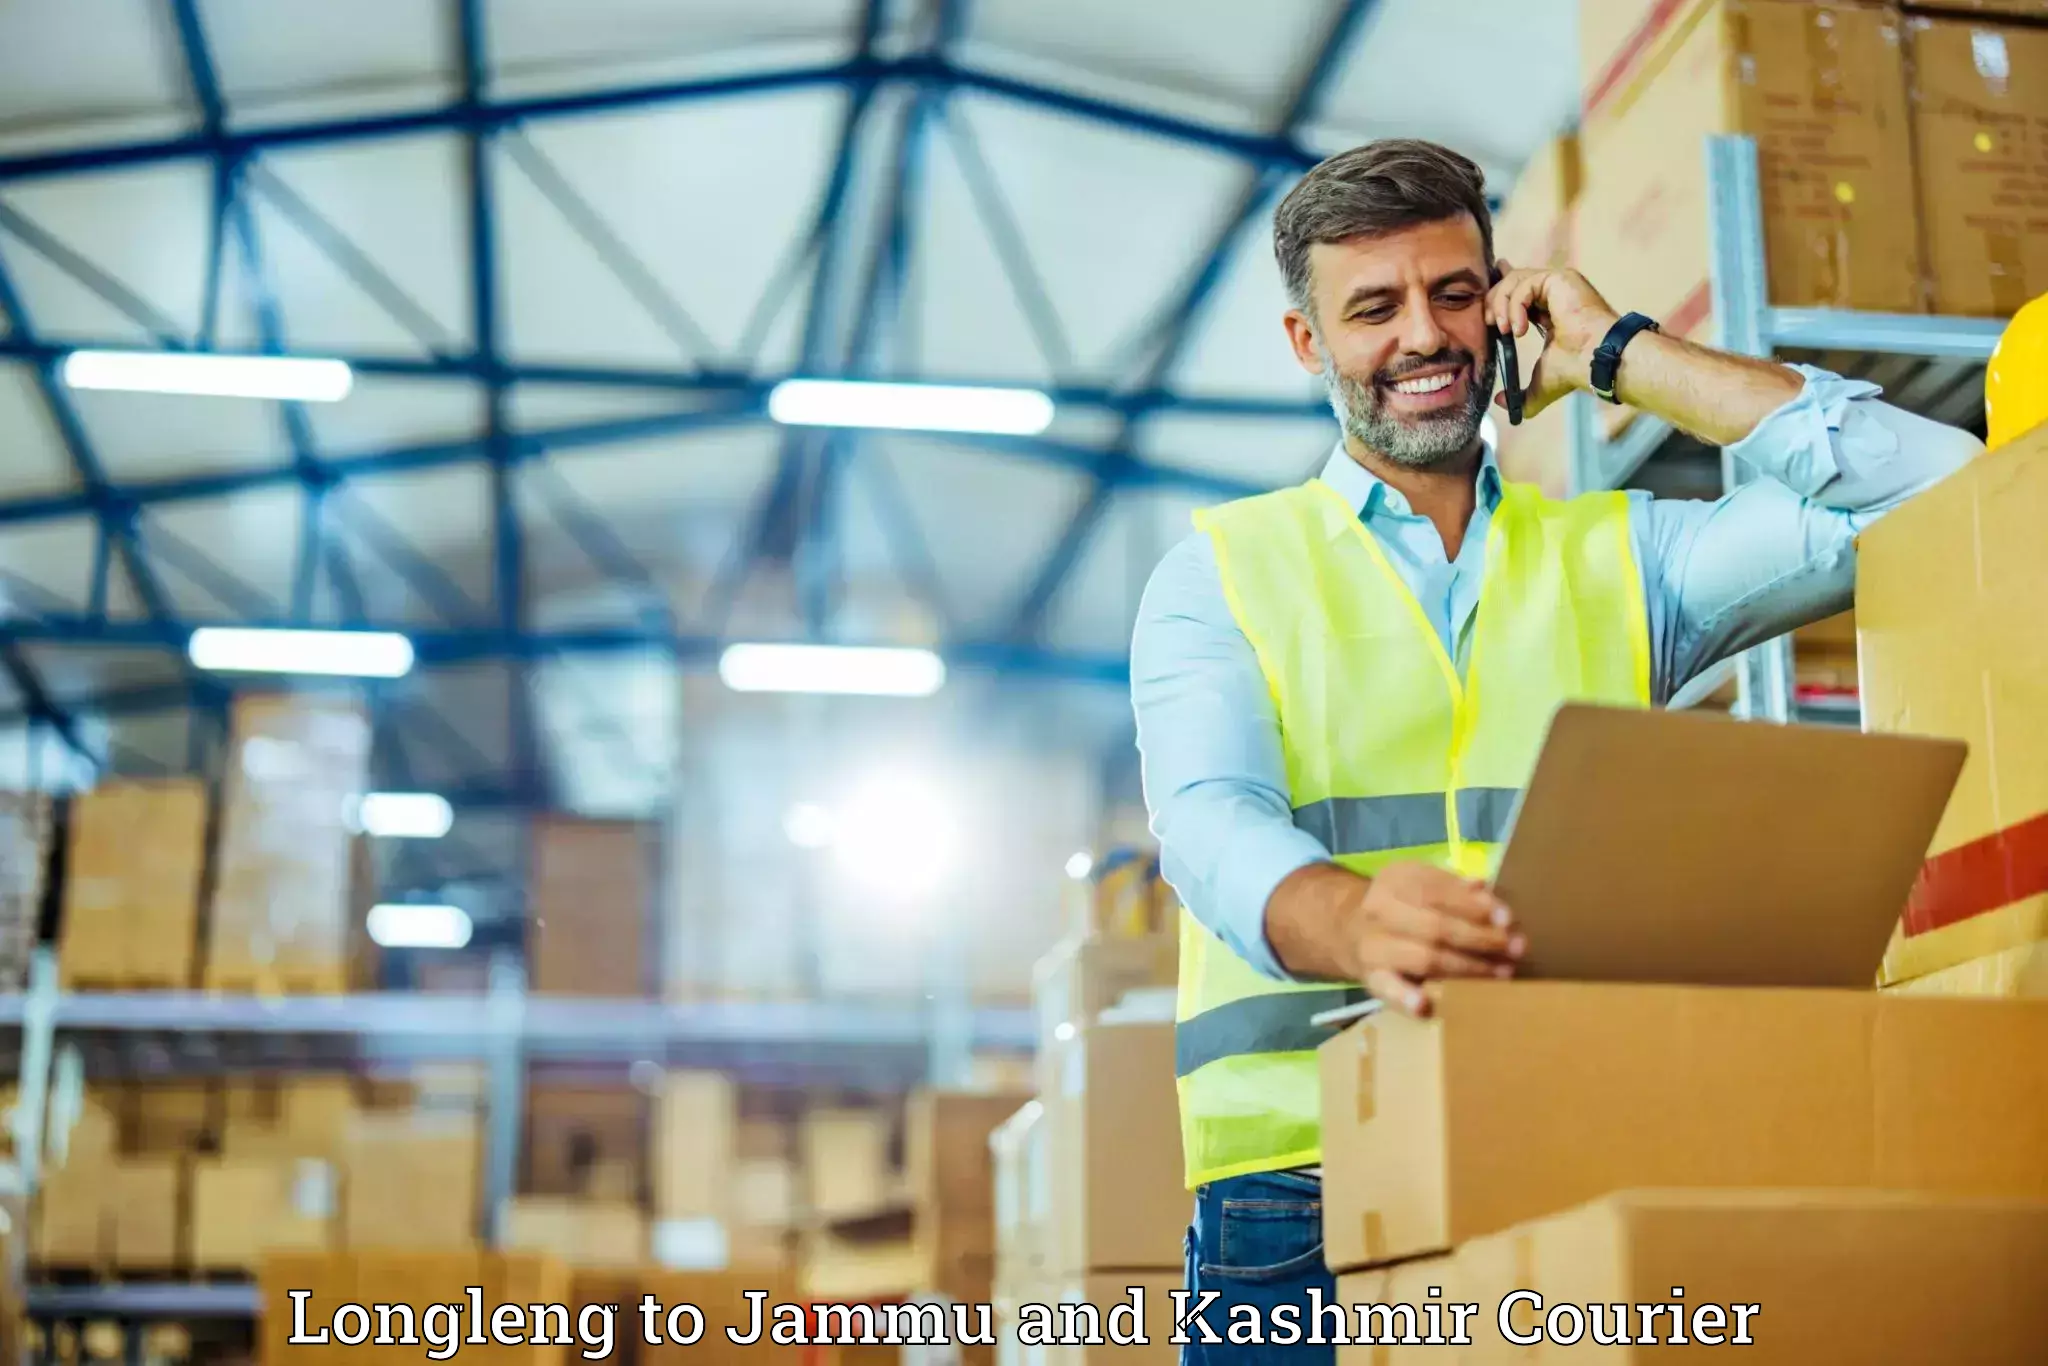 Full-service movers Longleng to Jammu and Kashmir